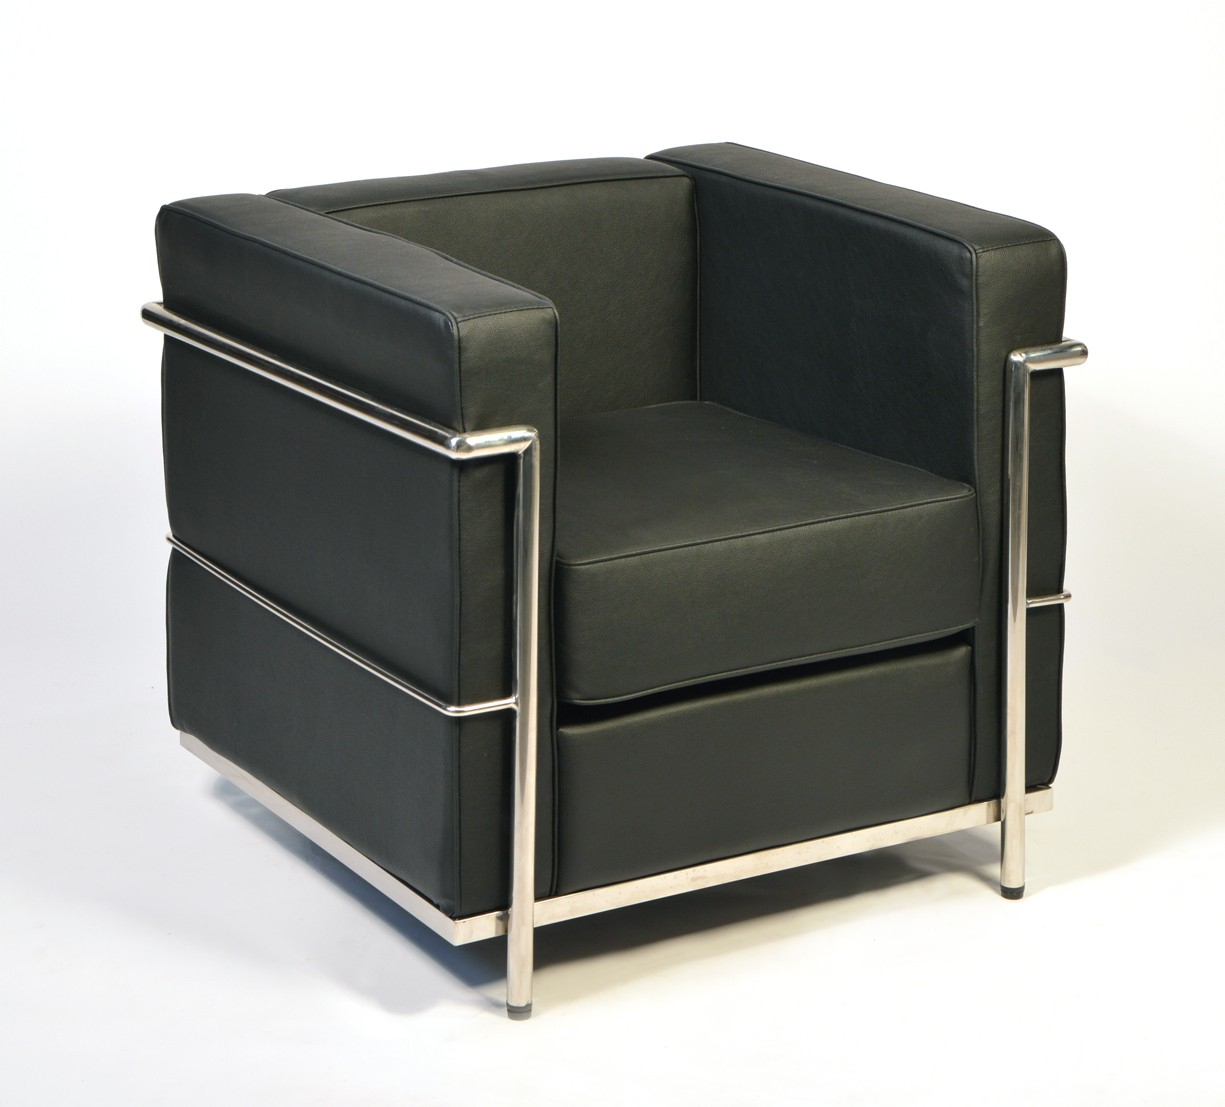 Fauteuil Le Corbusier Lc1 Le Corbusier Fauteuil Lc1 Imitation Made In Italy